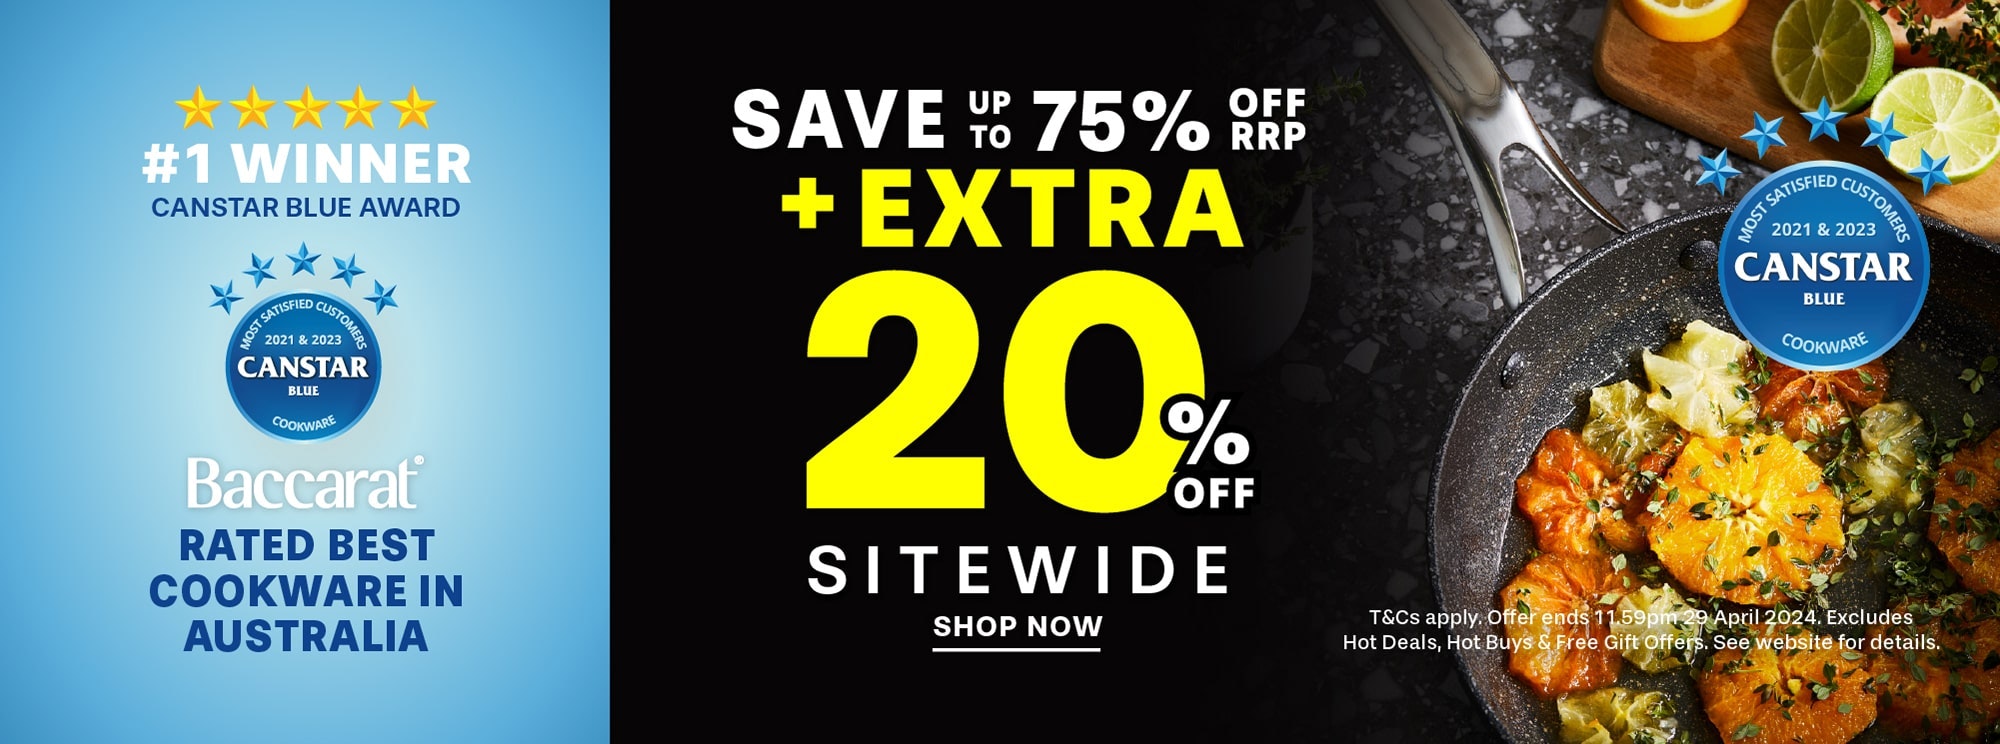 Save up to 75% Off + Extra 20% Off Sitewide